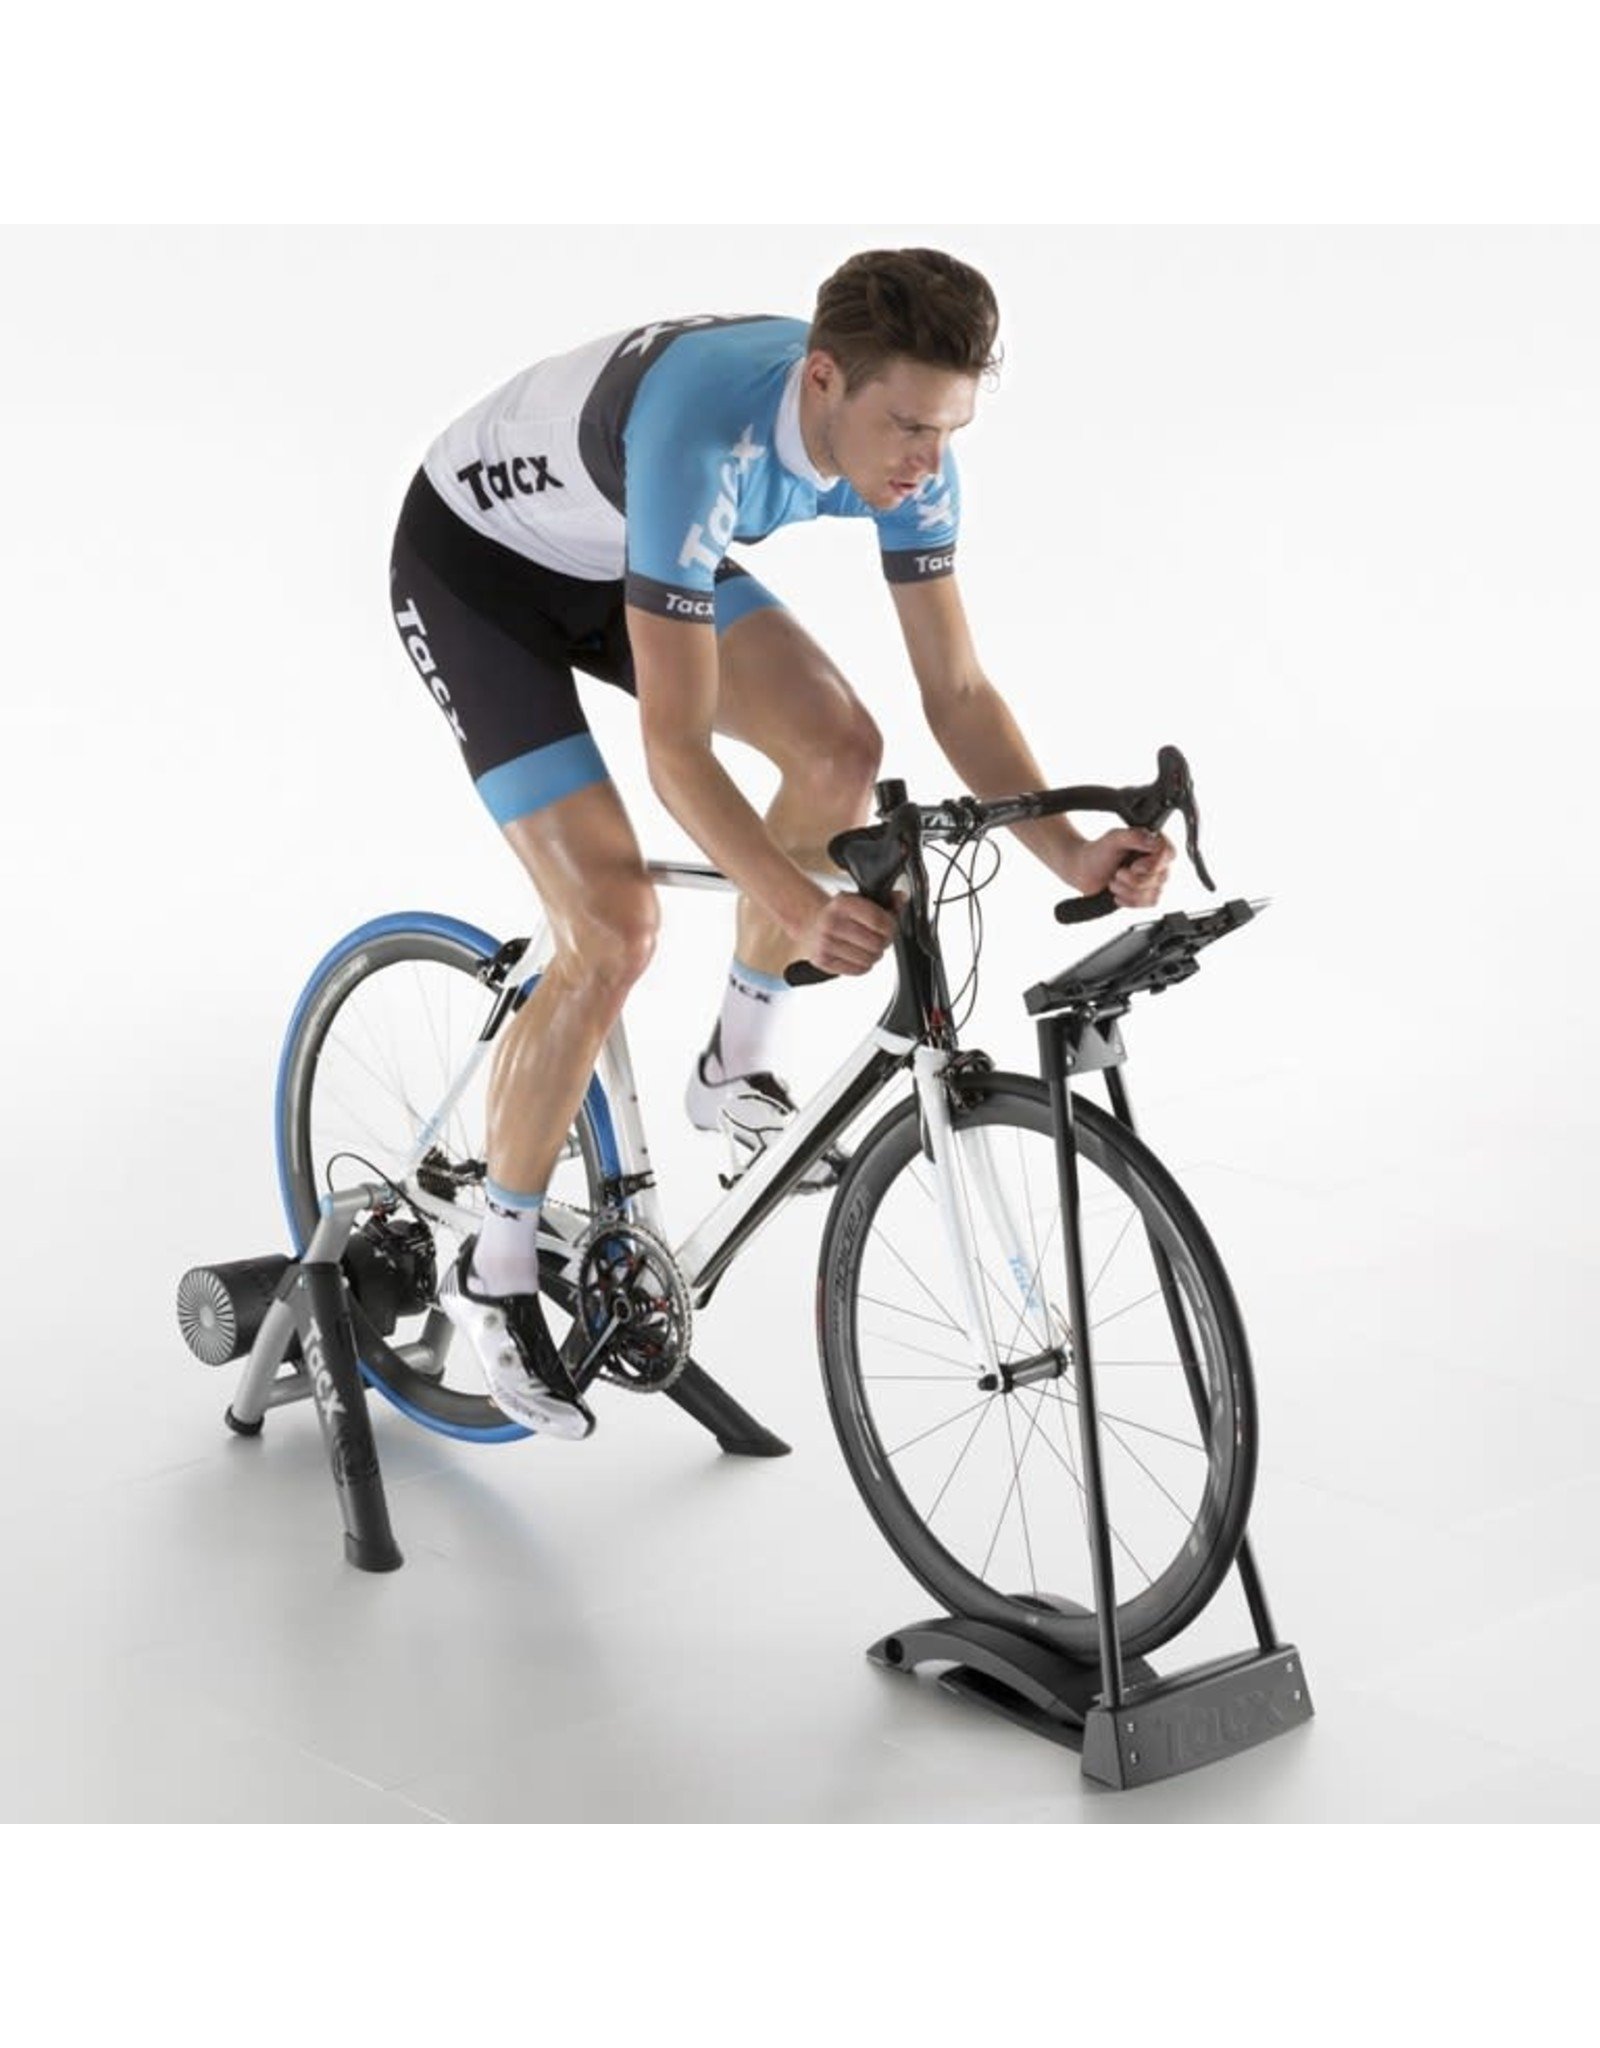 tacx tablet